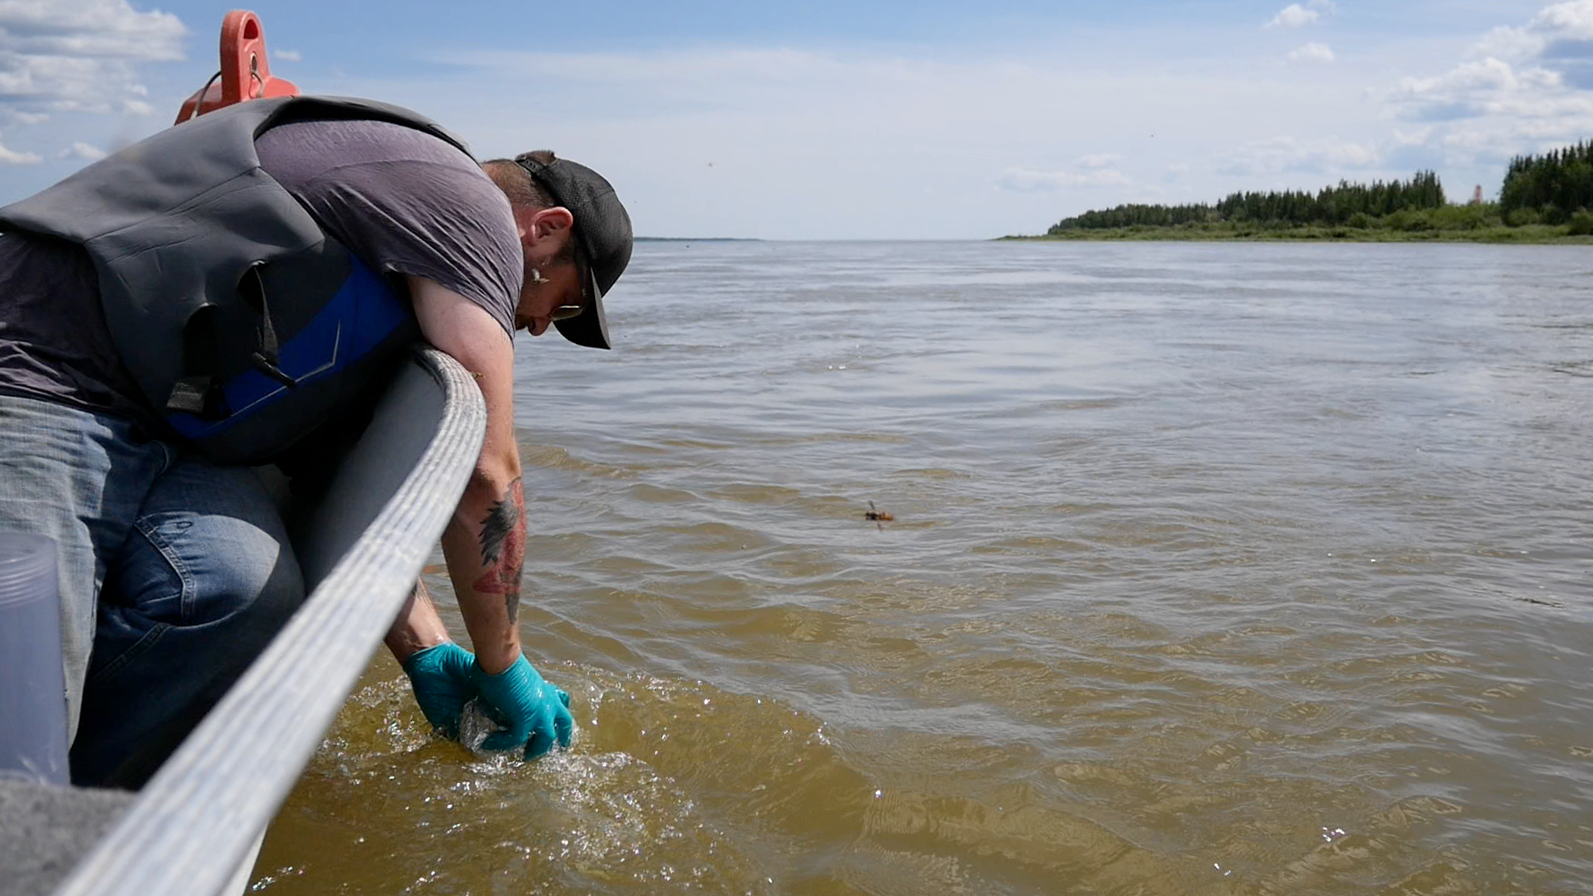 Mike Low, AAROM (Aboriginal Aquatic Resources & Ocean Management) Program Coordinator with Dehcho First Nations, collecting a water sample from a boat.